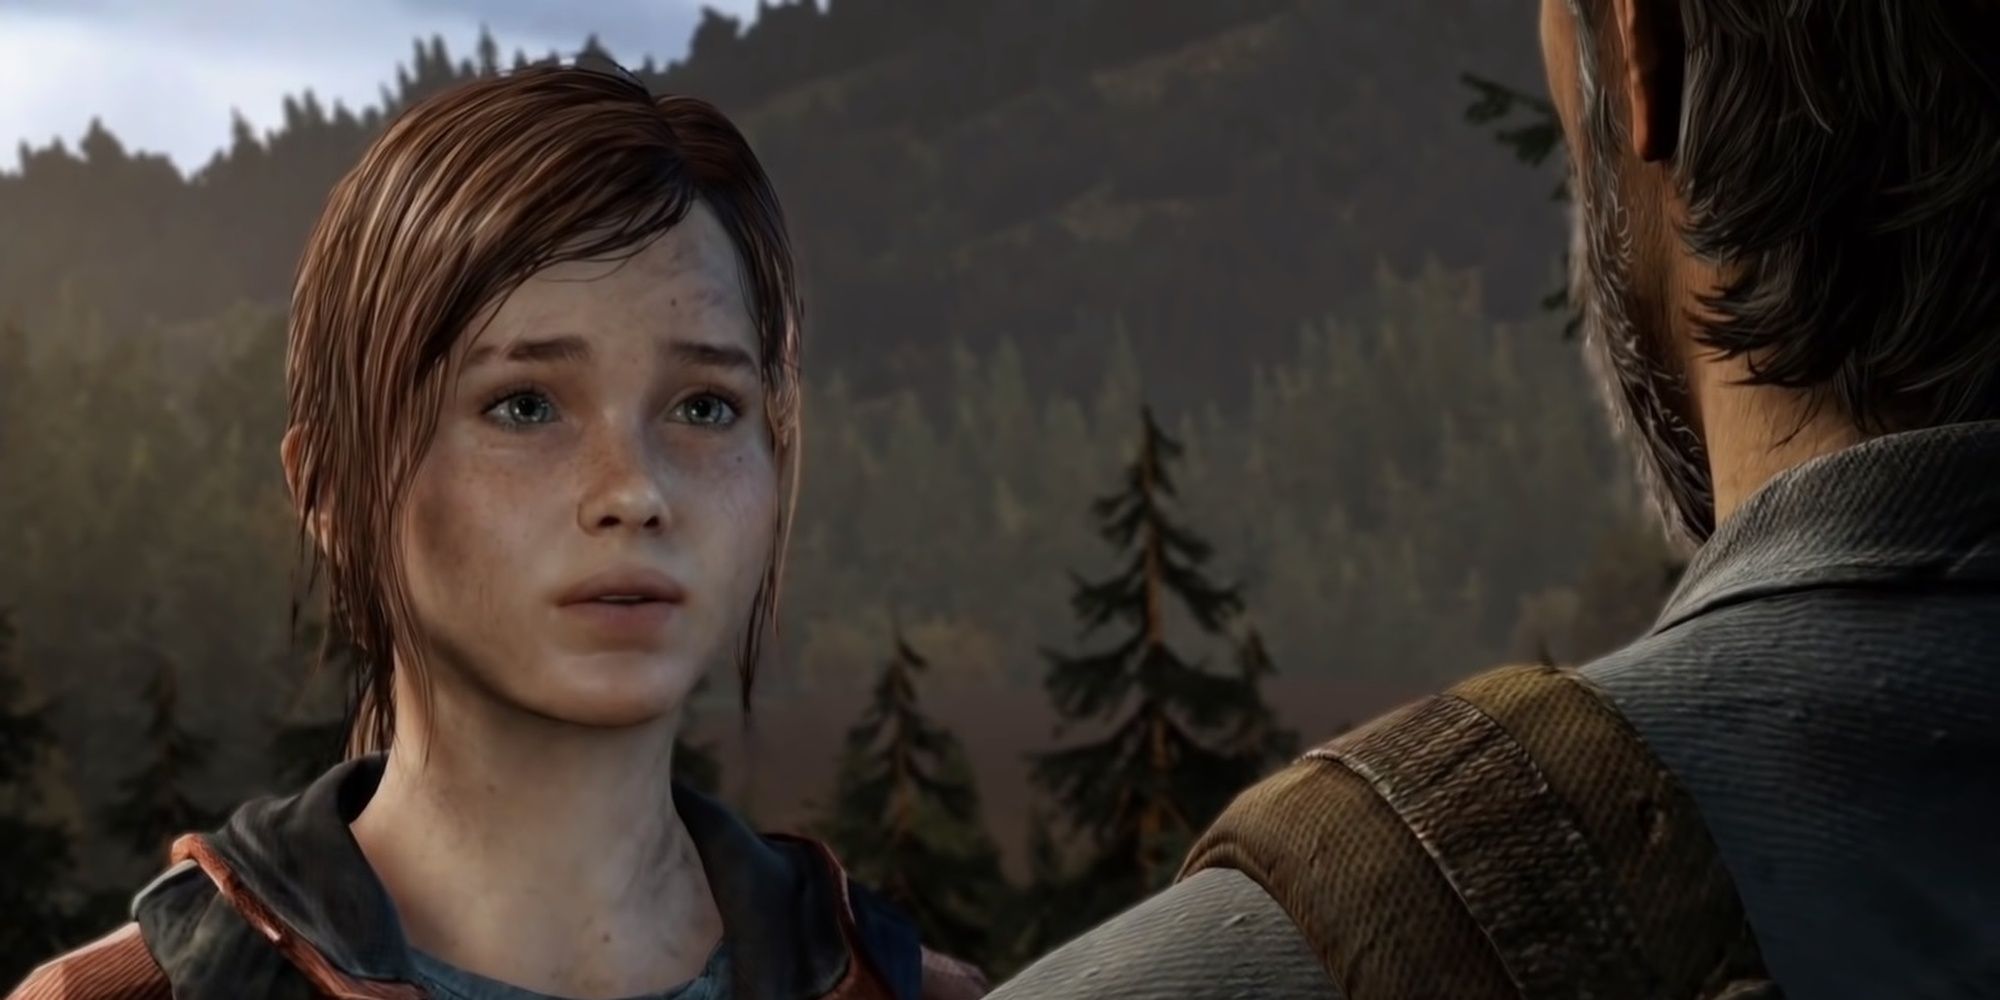 Joel lies to Ellie about what he's done in The Last of Us